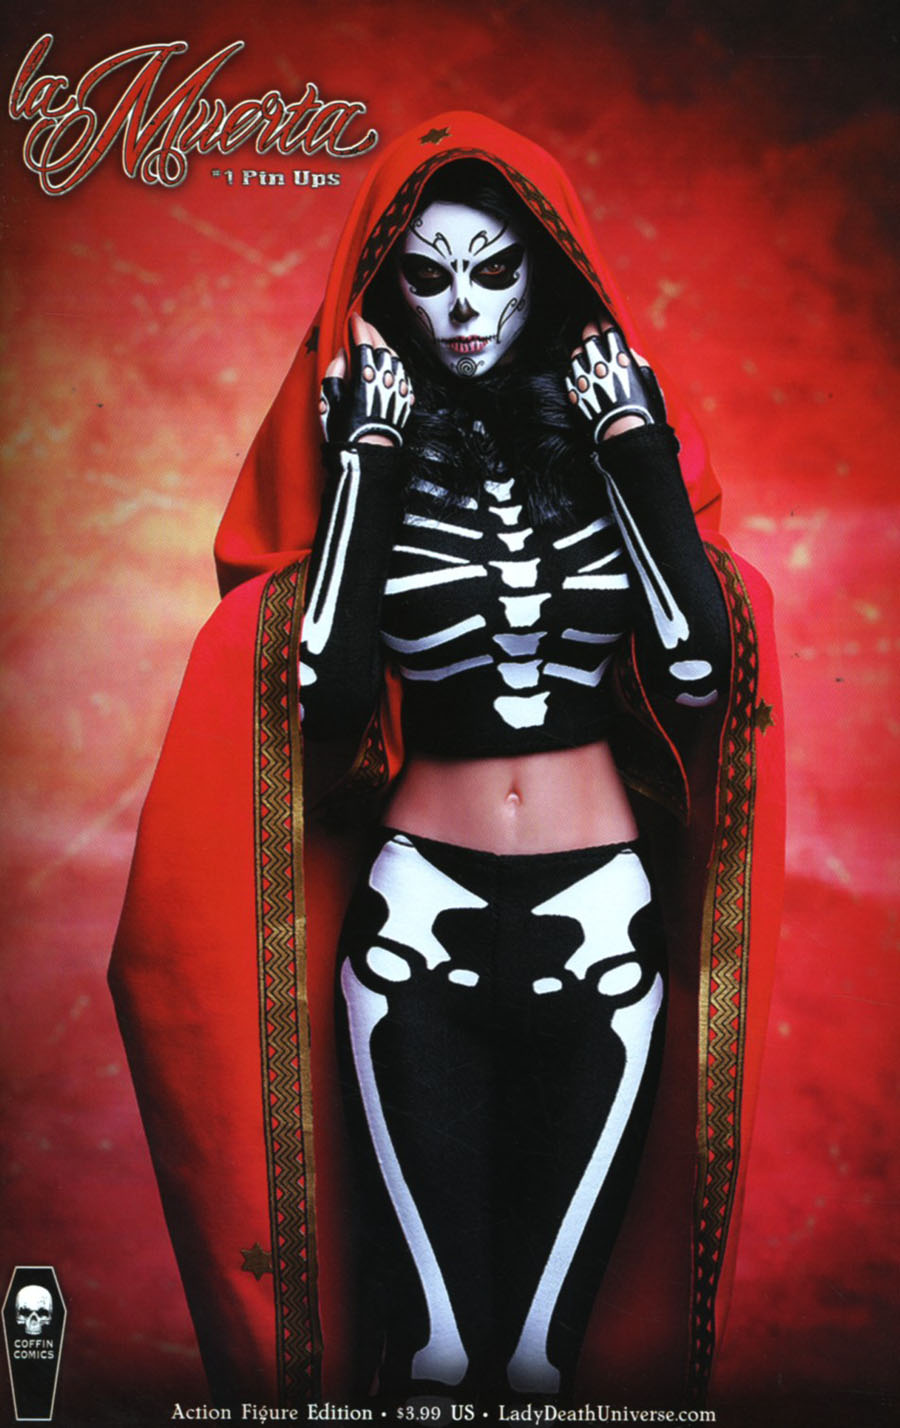 La Muerta Pin Ups One Shot Cover B Variant Action Figure Cover